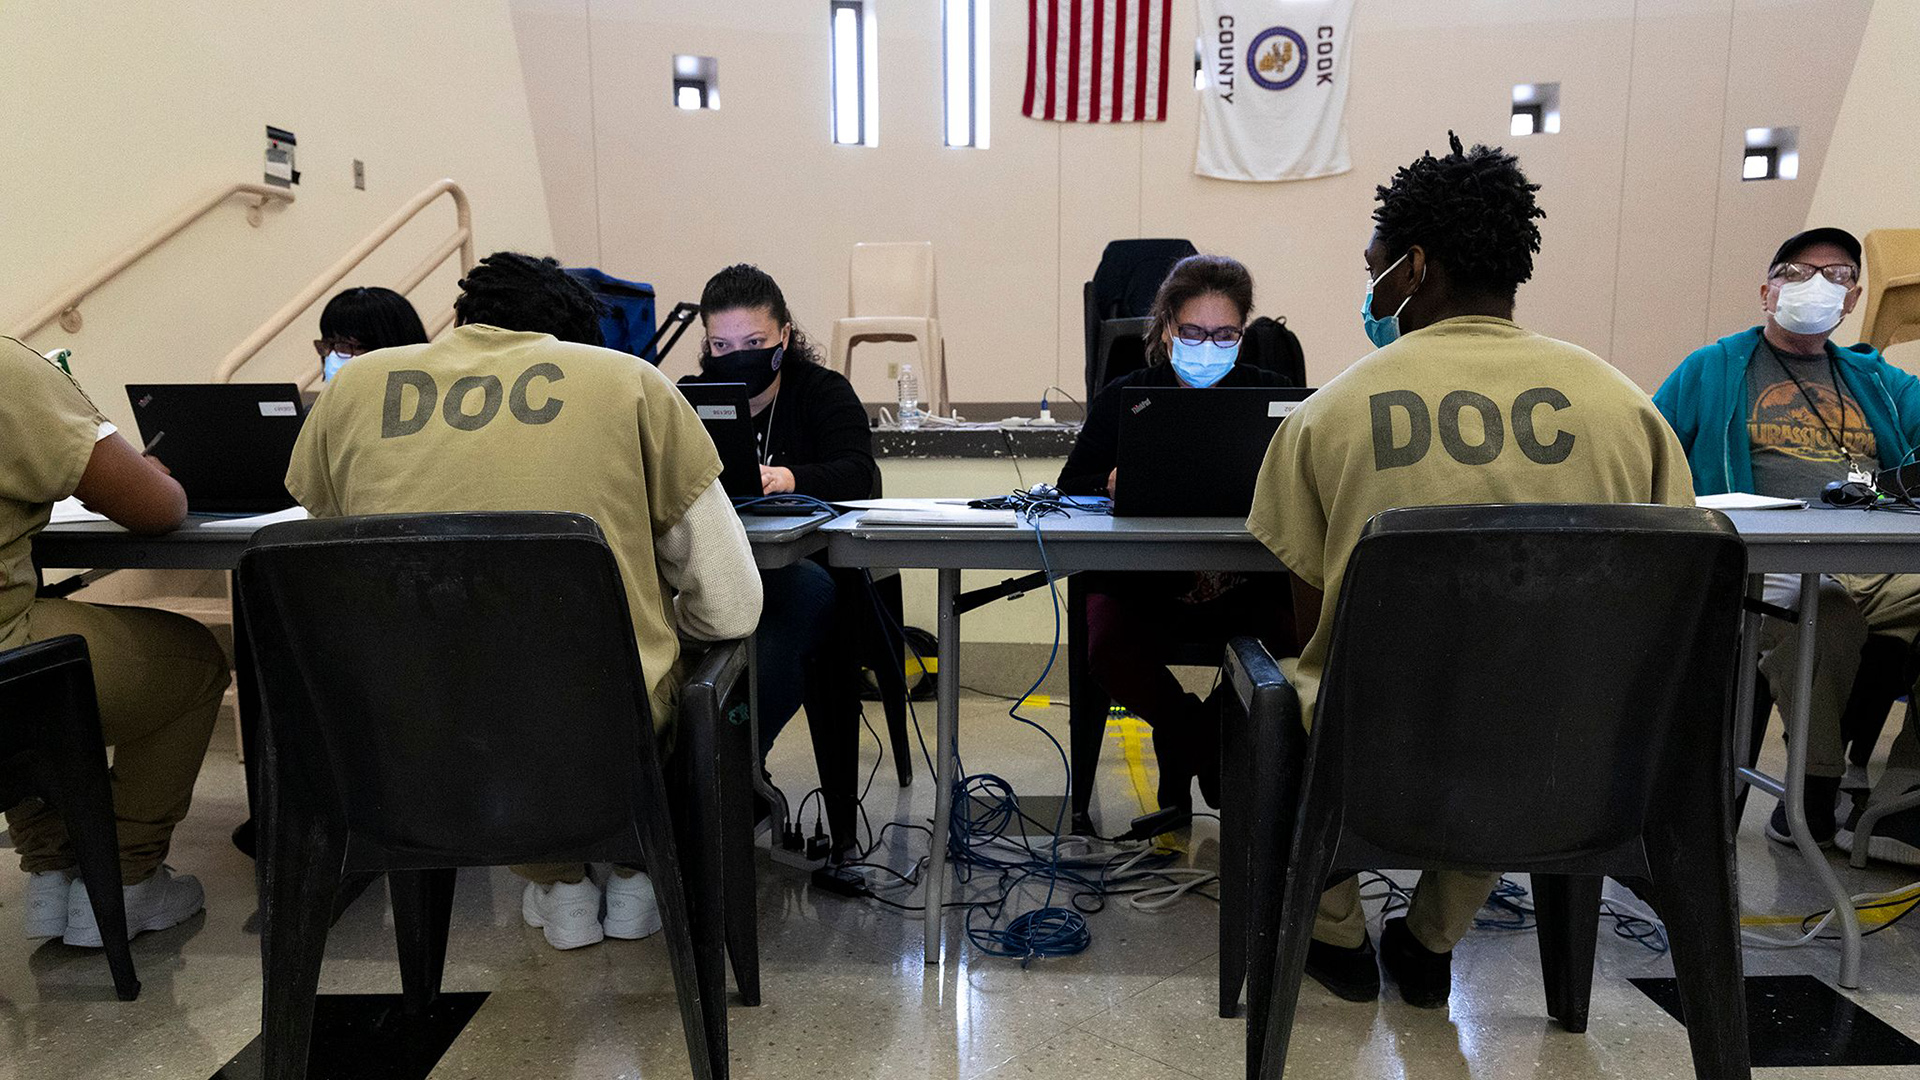 Three inmates sit at a table facing poll workers using laptops to conduct voting in a room with tall narrow and small square windows.